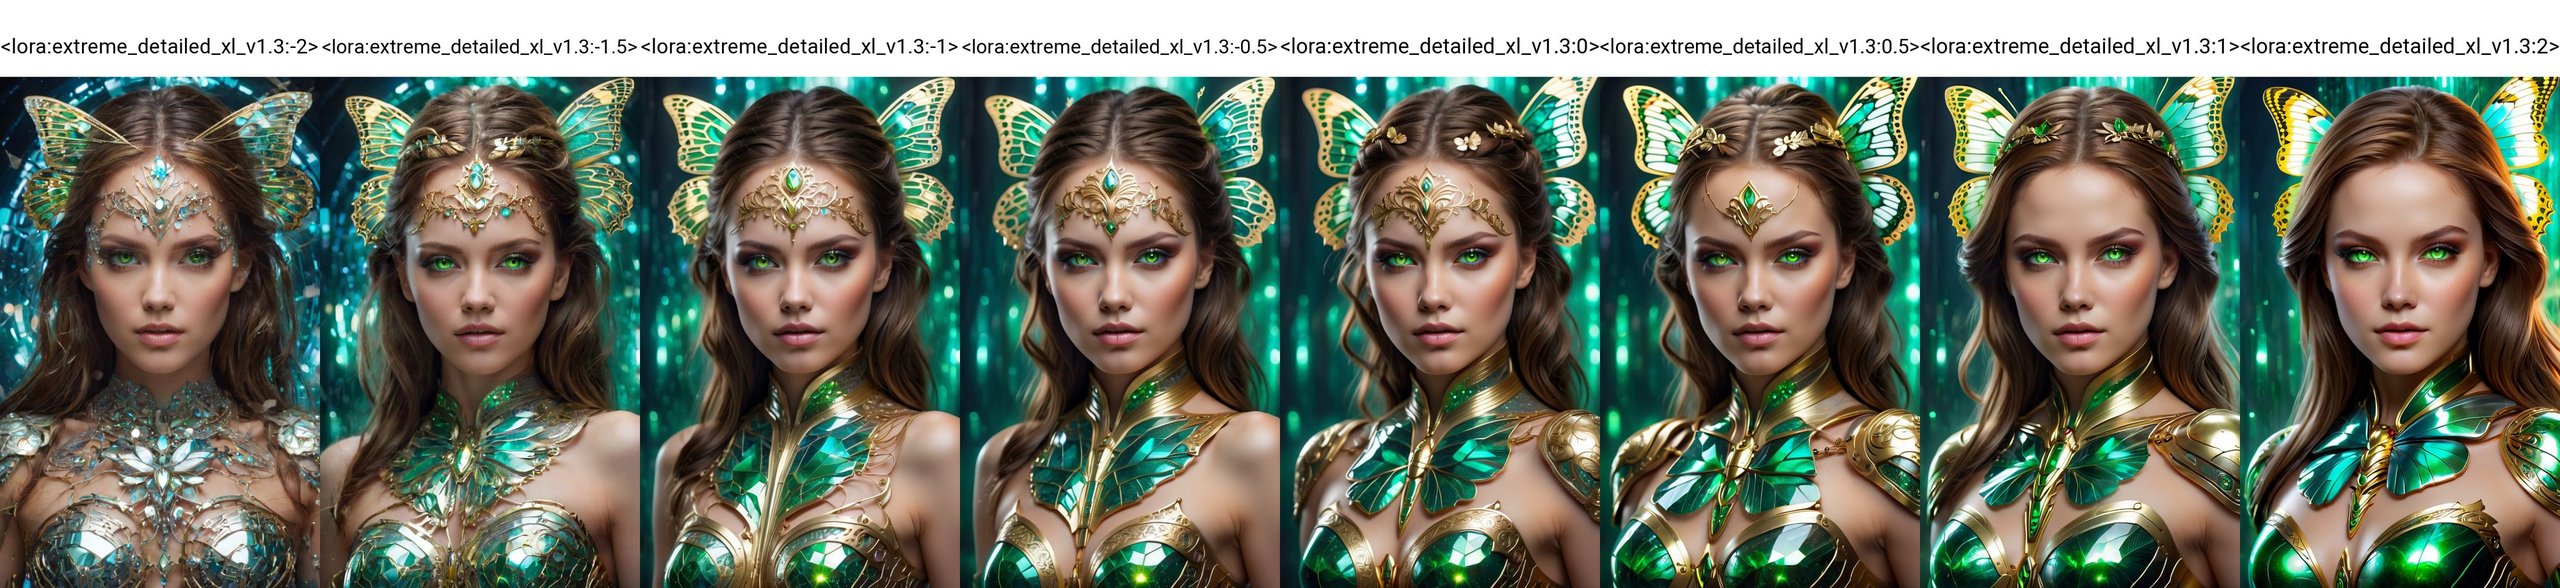 (best quality,8K,highres,masterpiece), ultra-detailed, (portrait of a stunning beauty woman, a beautiful cyborg with brown hair and sharp green eyes), an enchanting portrait capturing the beauty of a cyborg woman with striking brown hair and sharp green eyes. Her features are intricate and elegant, with every detail meticulously rendered to showcase her majestic presence. The portrait is captured through digital photography, allowing for the highest level of detail and realism. Adorning her cyborg form are delicate gold butterfly filigree accents, adding a touch of ethereal beauty to her appearance. Translucent fairy wings extend from her back, hinting at her otherworldly nature and grace. Surrounding her is a shattered glass motif, symbolizing both her fractured humanity and her resilience. This artwork captures the juxtaposition of beauty and technology, inviting the viewer to explore the depths of her character and identity. Feel free to add your own creative touches to enhance the realism and detail of this captivating portrait. <lora:extreme_detailed_xl_v1.3:-2>